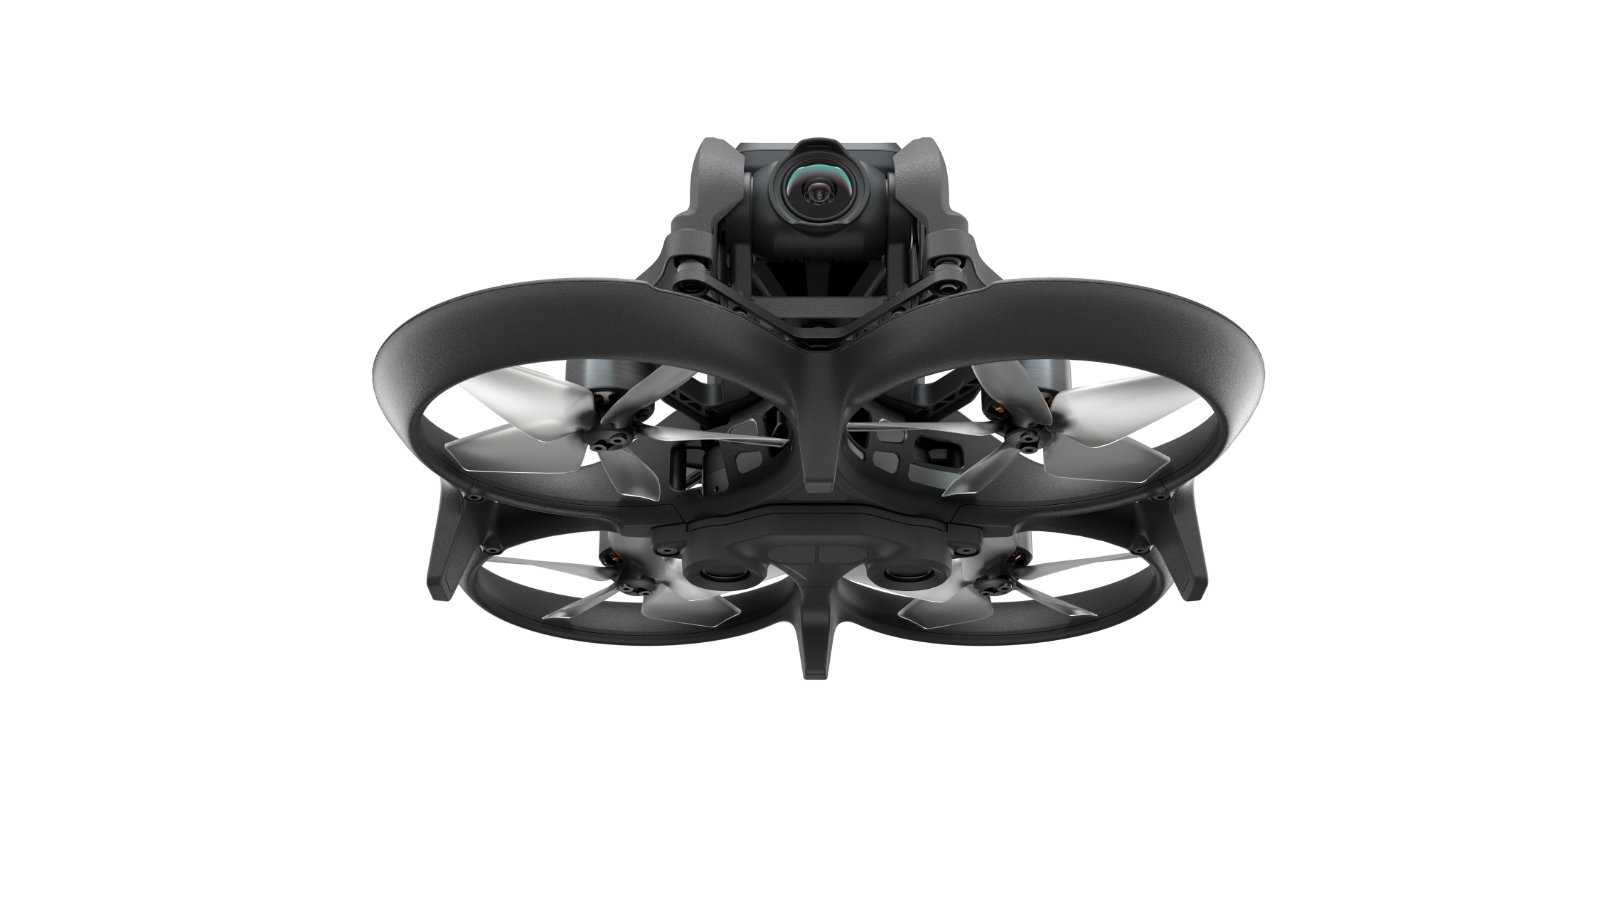 DJI Avata official images